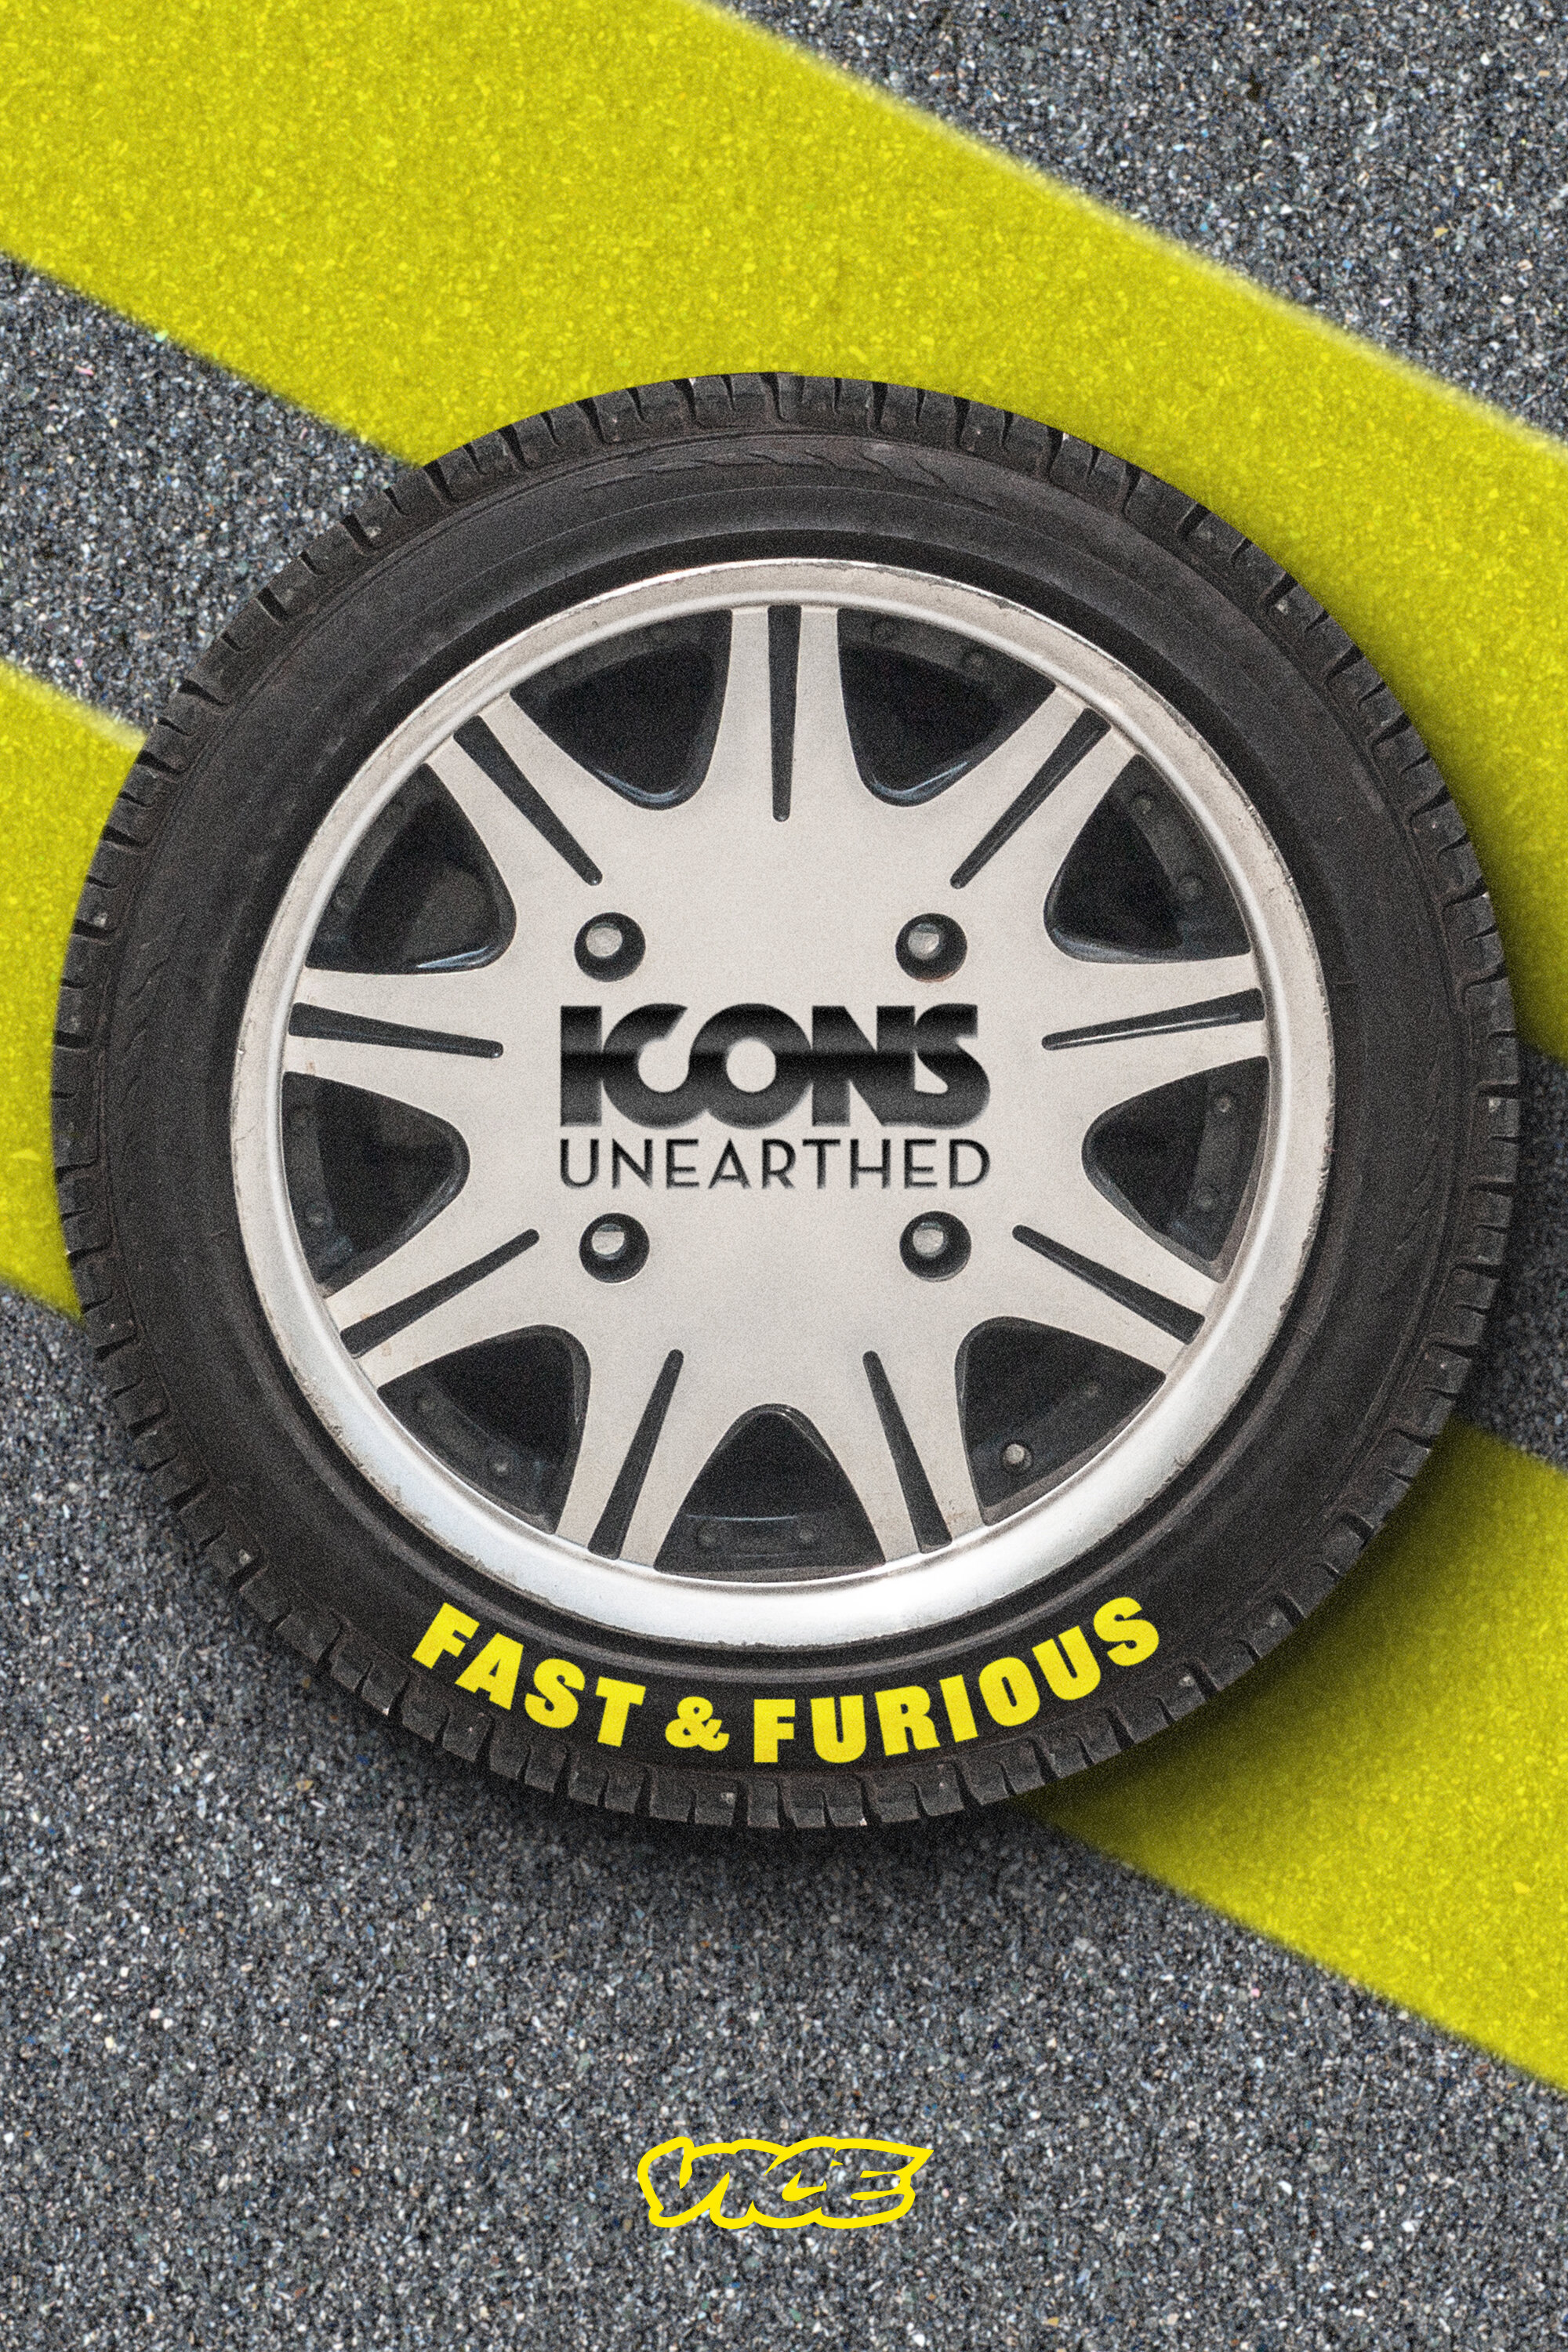 Icons Unearthed: Fast & Furious ne zaman